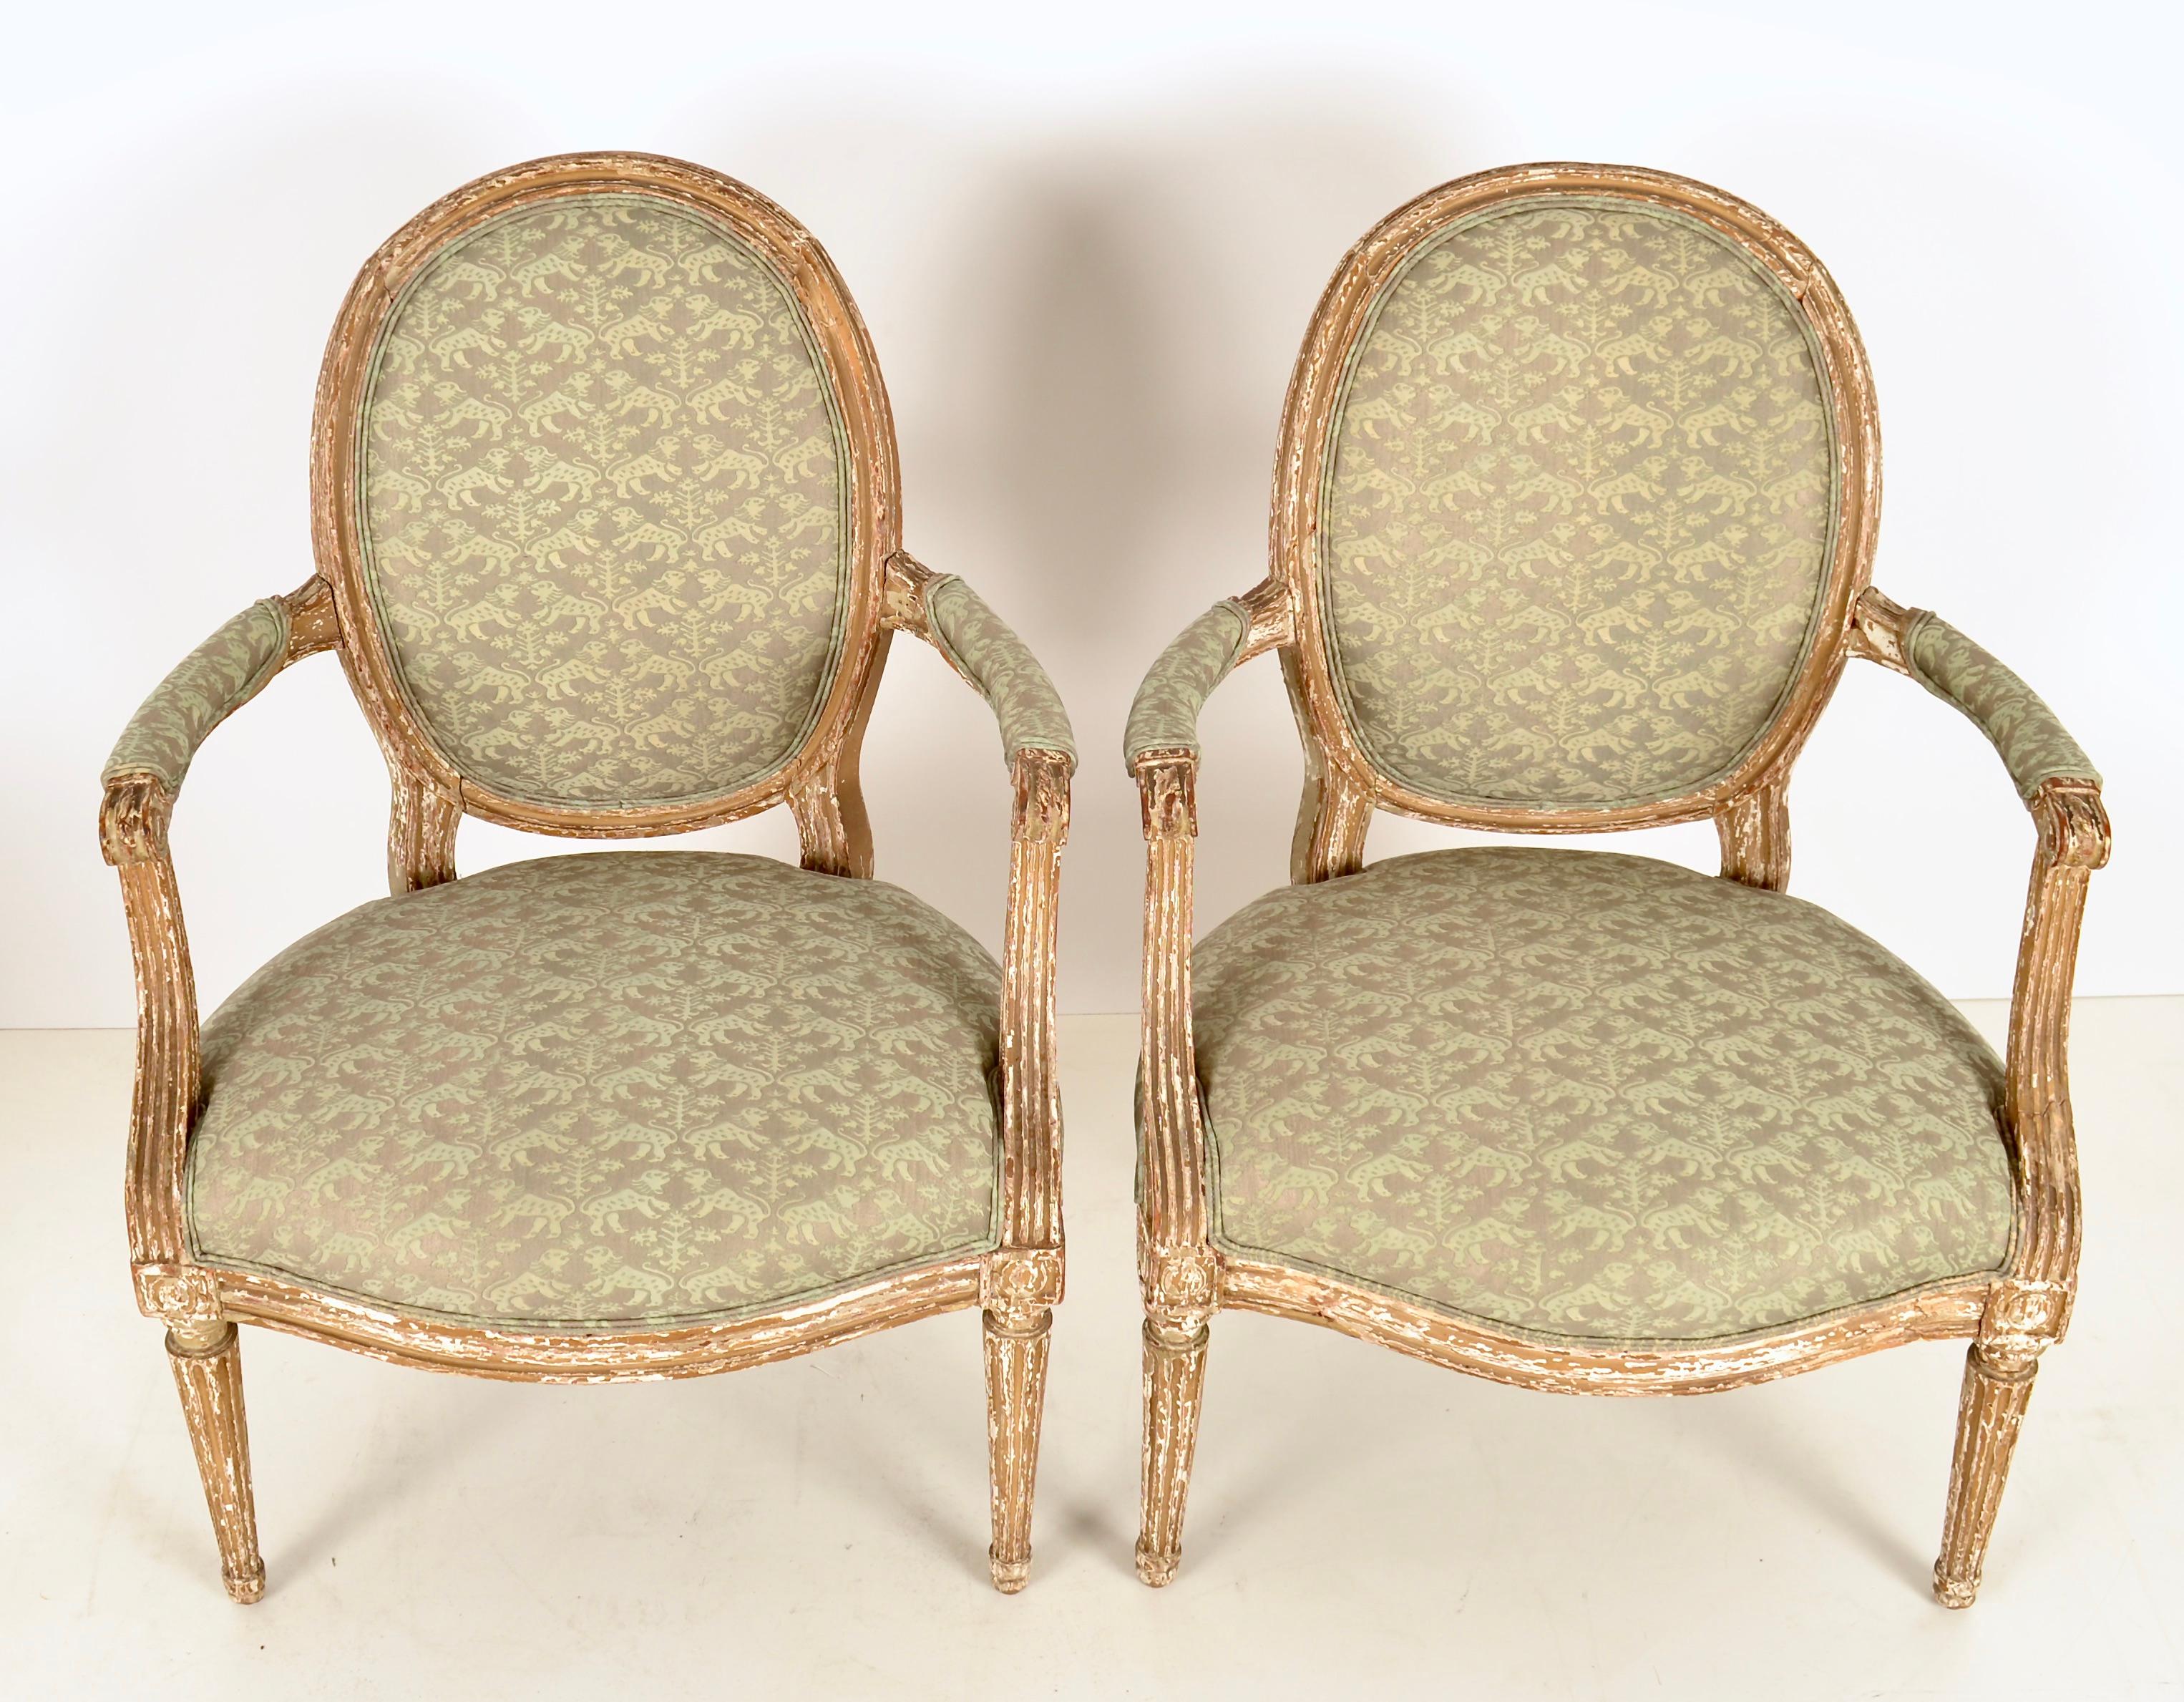 Pair of 19th c French Fauteuil Newly Upholstered in Fortuny Fabric In Fair Condition For Sale In Norwalk, CT